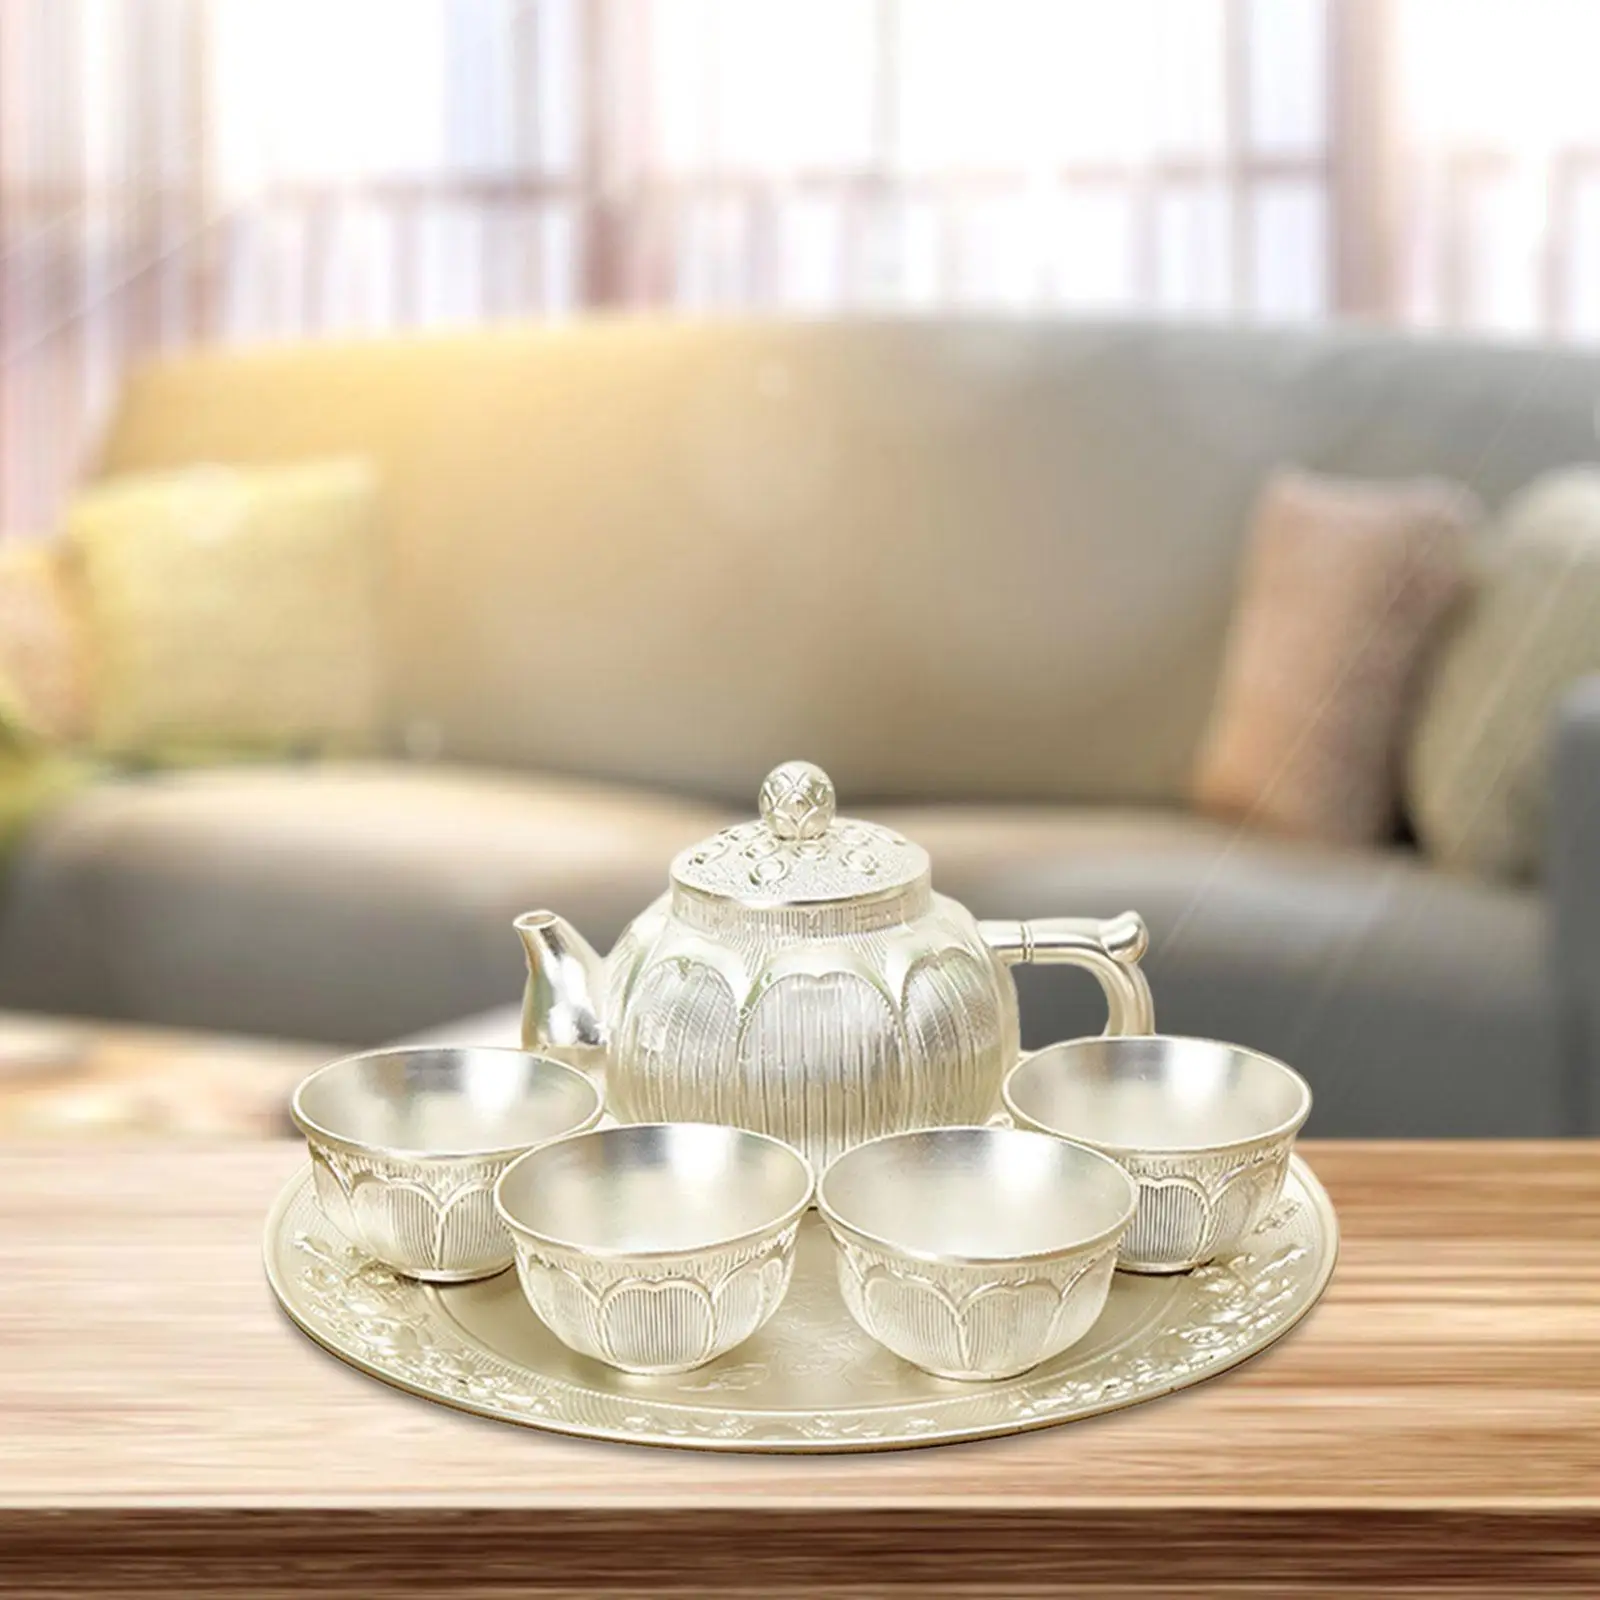 6x Afternoon Party Tea Set Zinc Alloy Tea Cup Set Handmade Vintage for Birthday Weddding Thanksgiving Adults Gifts